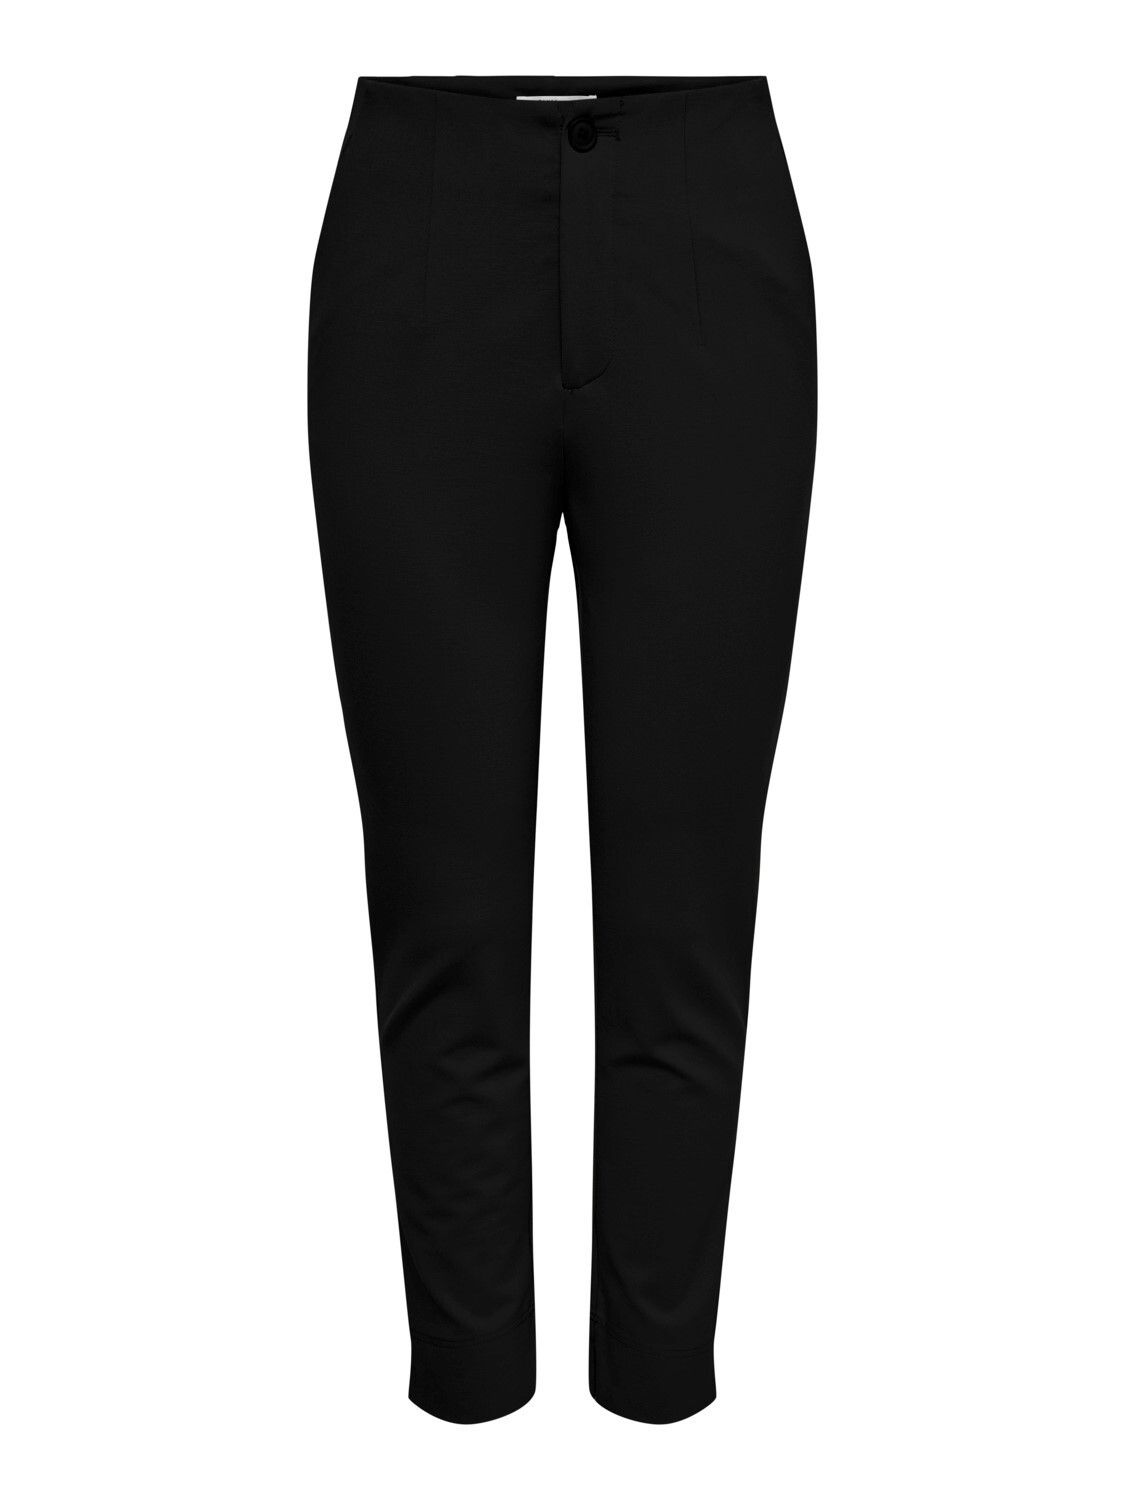 Brand: Only   Gender: Women   Type: Trousers   Color: Black   Fastening: Zip and Button   Season: Fall/winter